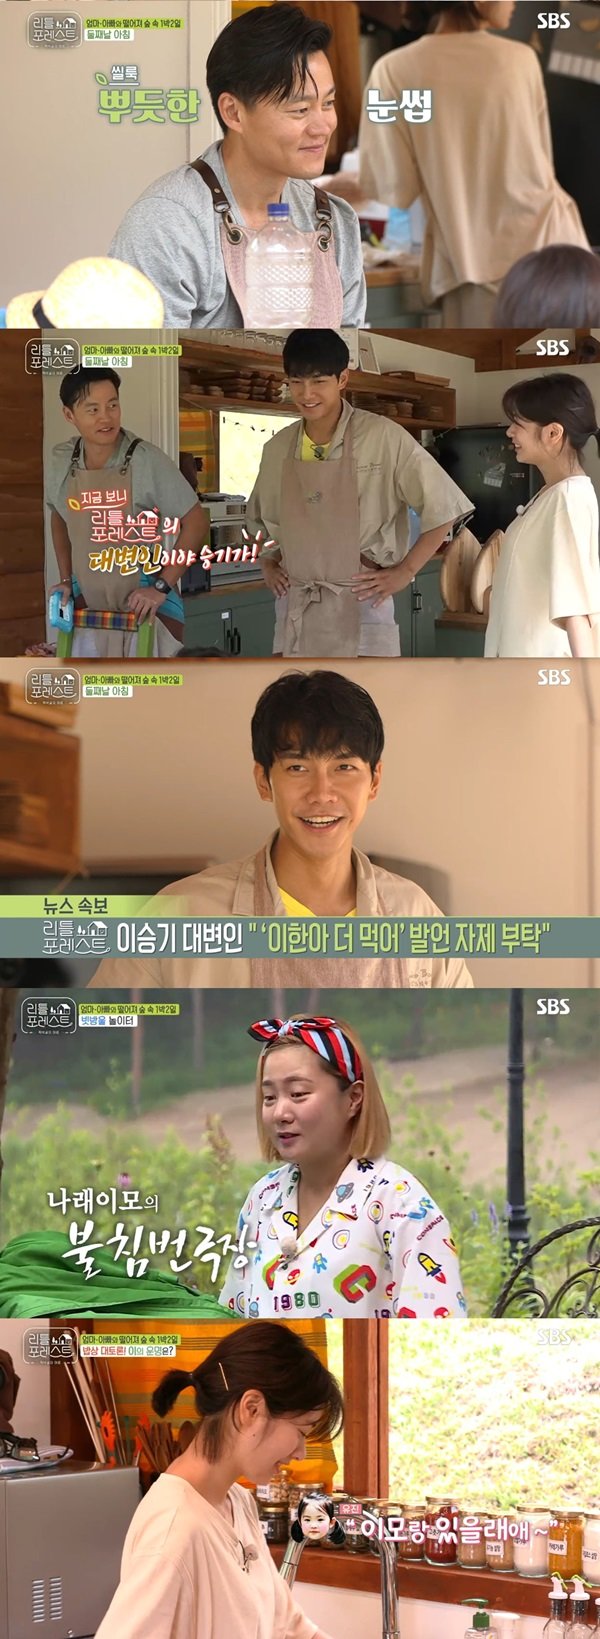 SBS Little Forest conveys the impression of Chest ringing every time and the healing of Mother Nature.On the 20th broadcast, Little Guys, who had a second day in the shoot, enjoyed blueberries as soon as he opened his eyes with Lee Seung-gi.Little Guys felt the taste of nature by eating fresh blueberries directly from the garden.Lee Seo-jin prepared beef soup, mackerel grilled and little kimbap for breakfast for the children.The children gave Lee Seo-jins Food a passing score today, including asking for more mackerel grilling.Lee Seung-gi took over as the official spokesman for Tjak Bakgol.Lee Seung-gi quickly took Lee Han to the bathroom when Lee Han, who was eating rice, quietly said he wanted to see a big thing.Lee Seo-jin laughed at Lee Seung-gi, who is in charge of the childrens excretions, saying, It is a spokesman.Lee Seung-gi responded by saying, Stop it, please refrain from saying that you should eat more as an official spokesman.Park Na-rae, the first inviolable, woke up sleeping all night, unable to sleep in care of his children.Park Na-rae told the story of what happened last night and made parents feel sympathetic to sleepless parents at night because they were looking after their children.Lee Seo-jin and Jung So-min prepared anhydrous curry for their childrens lunch.While preparing for Food, the two talked about their feelings that became more comfortable and closer to the Little People.Lee Seo-jin was delighted to be close to Little, saying, Grace hung on to me for the first time.Jung So-min recalled the night with Eugene and said, All the hardships and fatigue have been solved. Lee Seo-jin smiled, saying, I have to have a baby soon.Lee, who confirmed that the tooth was coolly picked, laughed brightly and approached Brooke, who was proud of her.He also gave a kiss to Lee Seung-gi, a tooth fairy, and received an allowance of 1100 won in praise for Park Na-rae.Lee Seung-gi, who became a tooth fairy of the bakgol, soared to 7.4% per minute and won the best one minute.